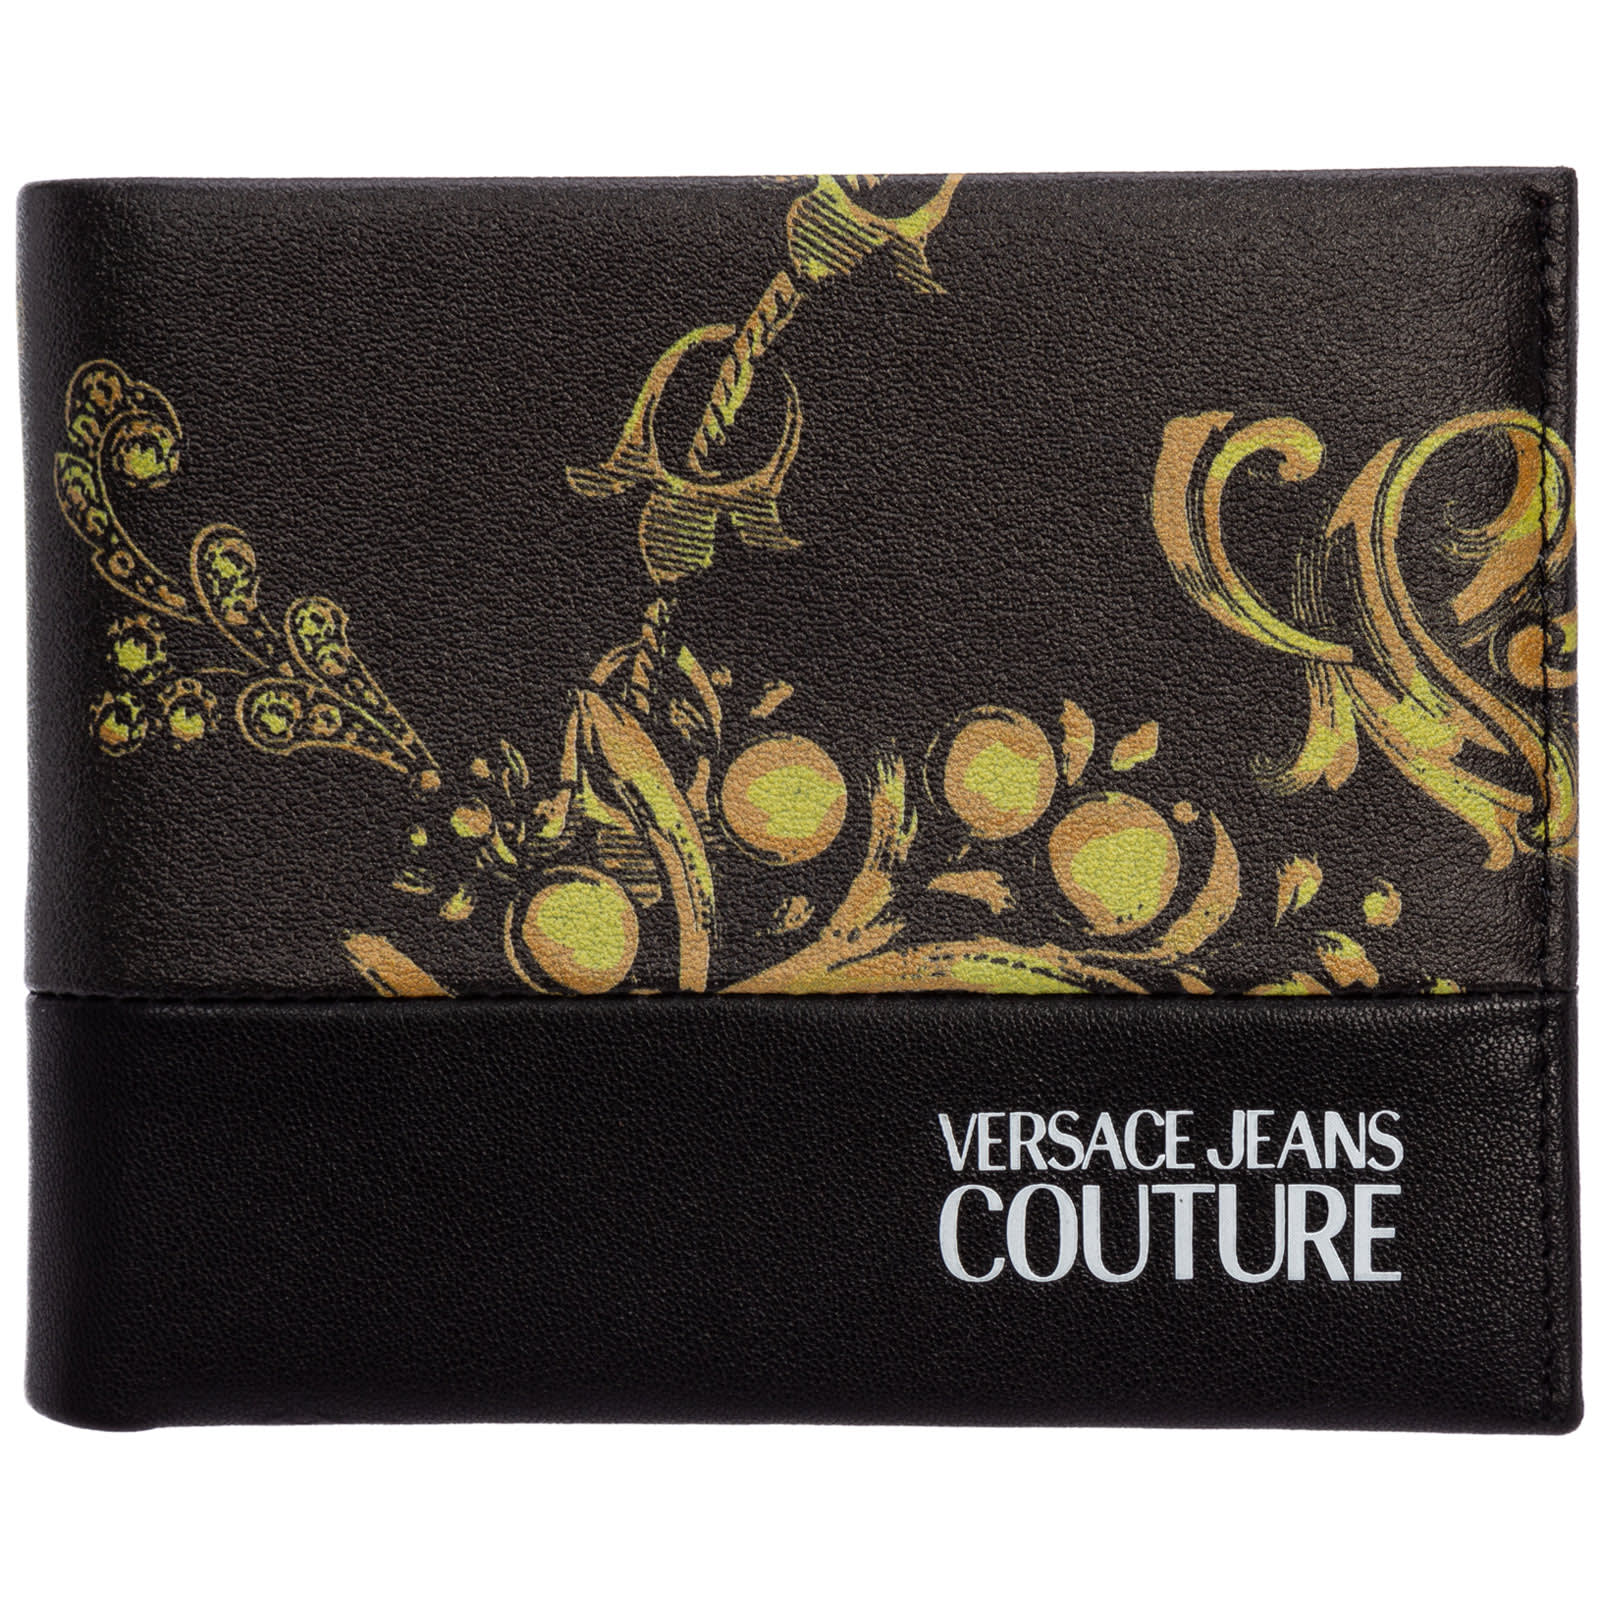 Versace Jeans Couture Baroque Wallet